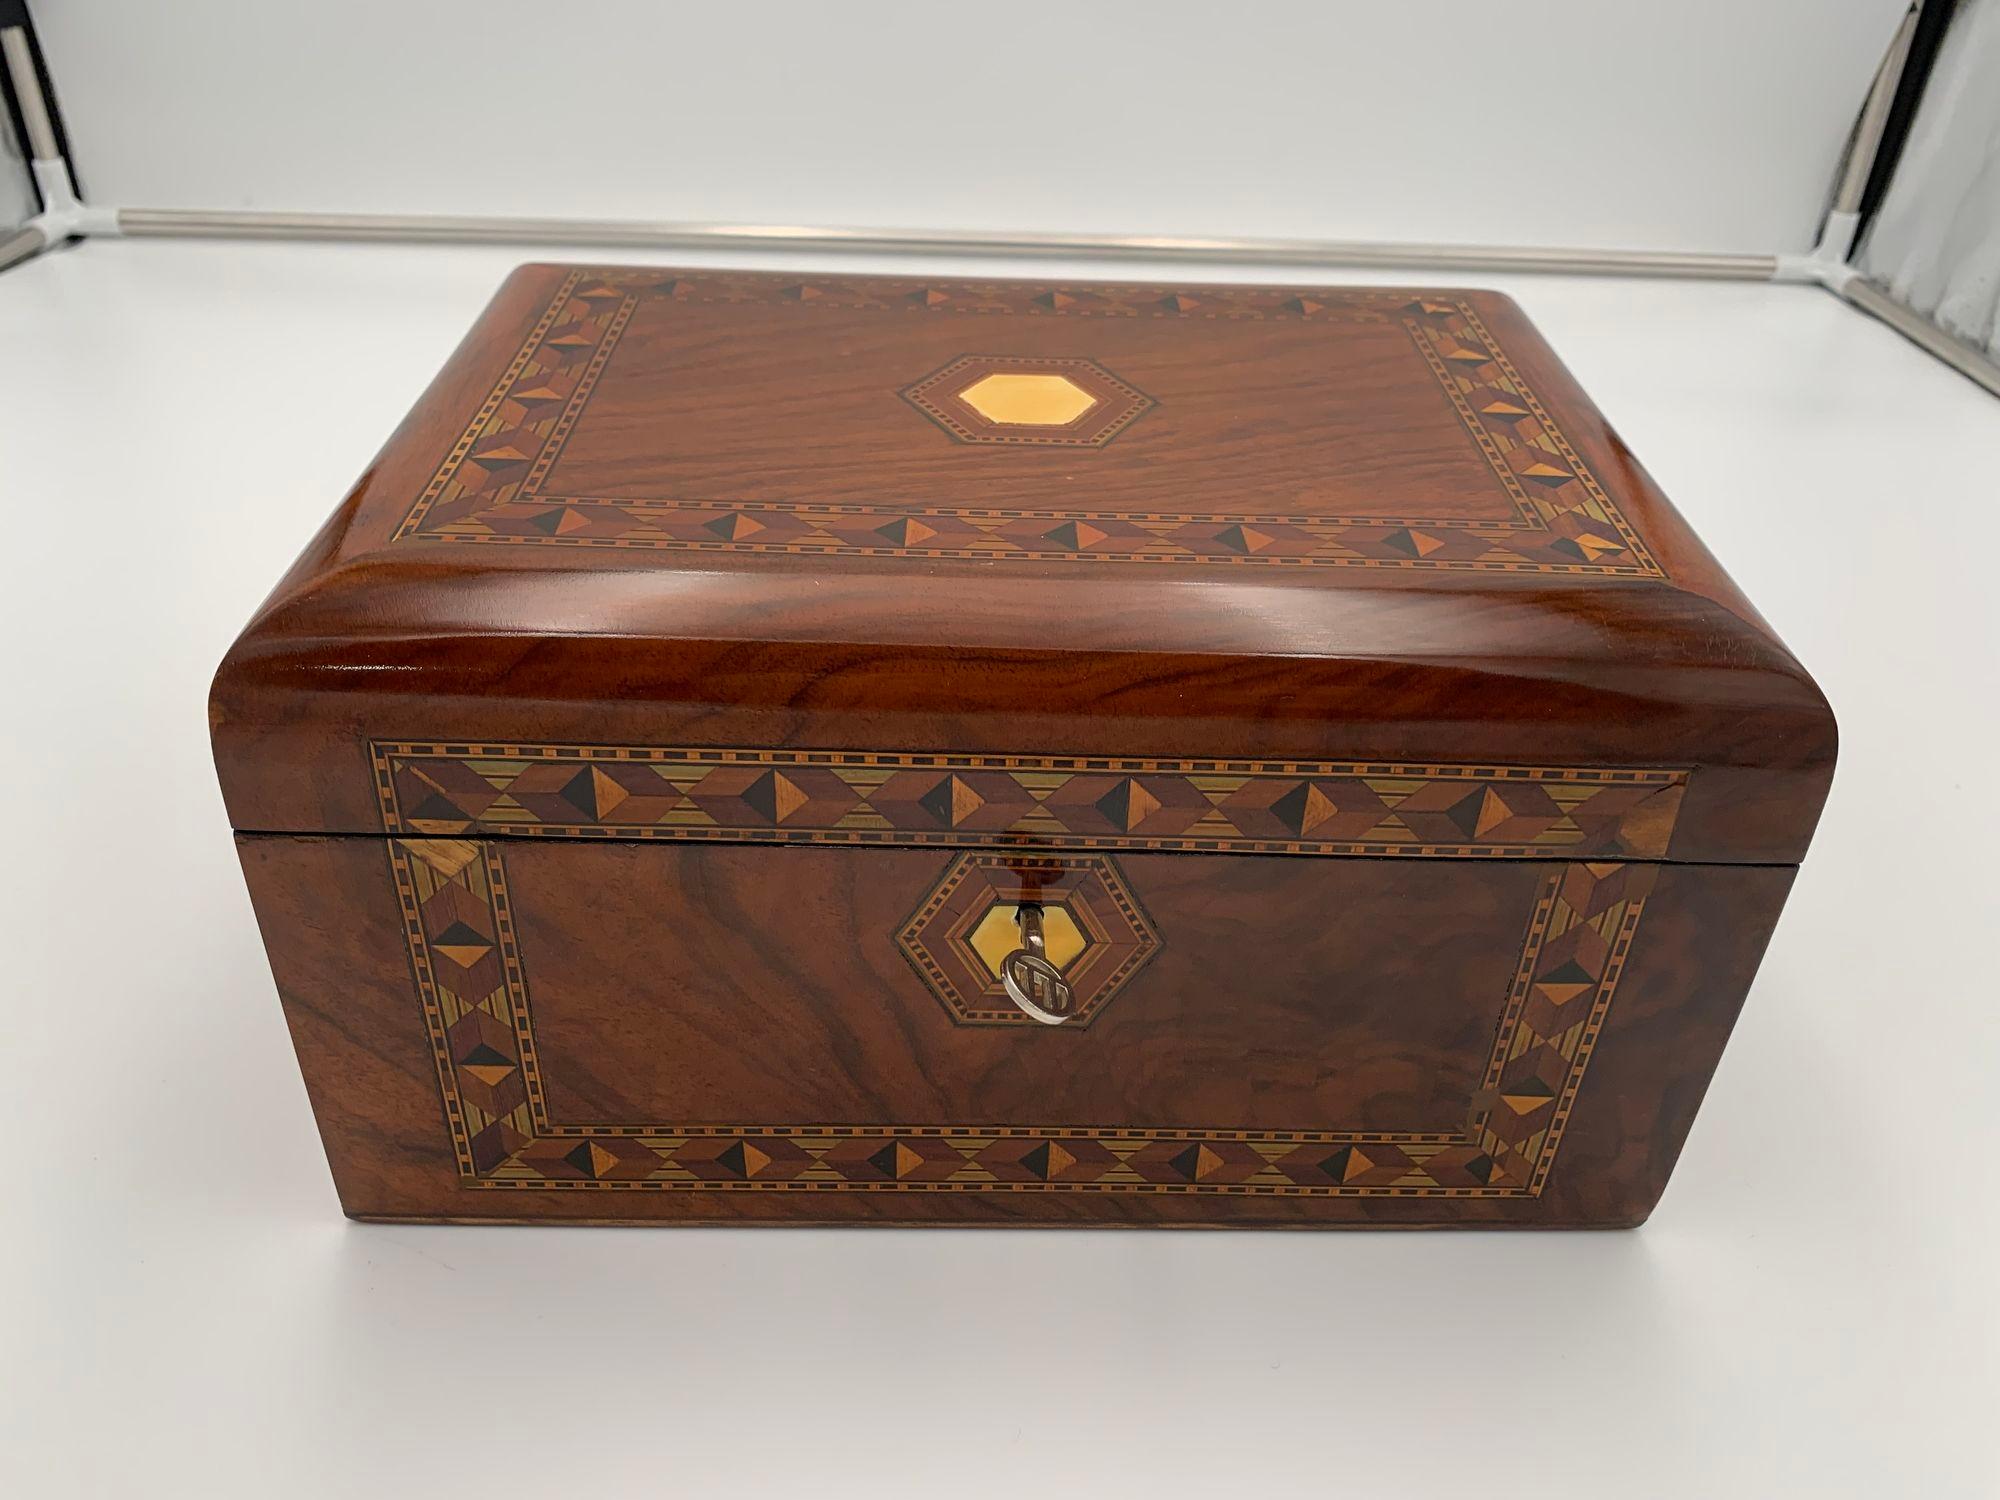 Historicism jewelry box, walnut with inlays, Germany, 19th century
Walnut inlaid with various colored woods, including maple, plum, ebony and stone. Working old lock. Restored and shellac hand-polished.
Dimensions: H 15 cm x W 27.7 cm x D 20 cm.